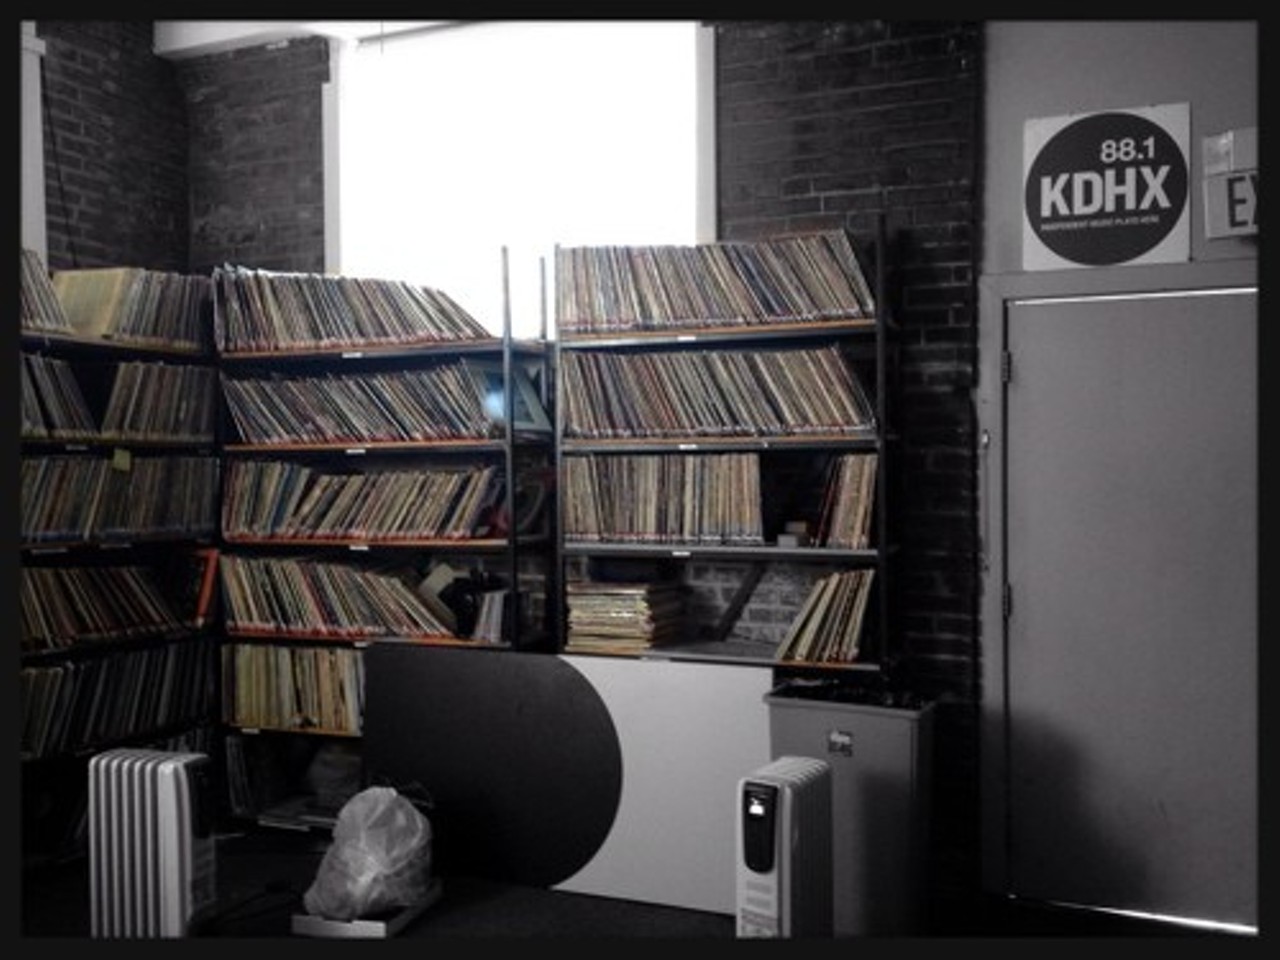 A Look Back at the Old KDHX Studio on Magnolia Avenue [PHOTOS] St